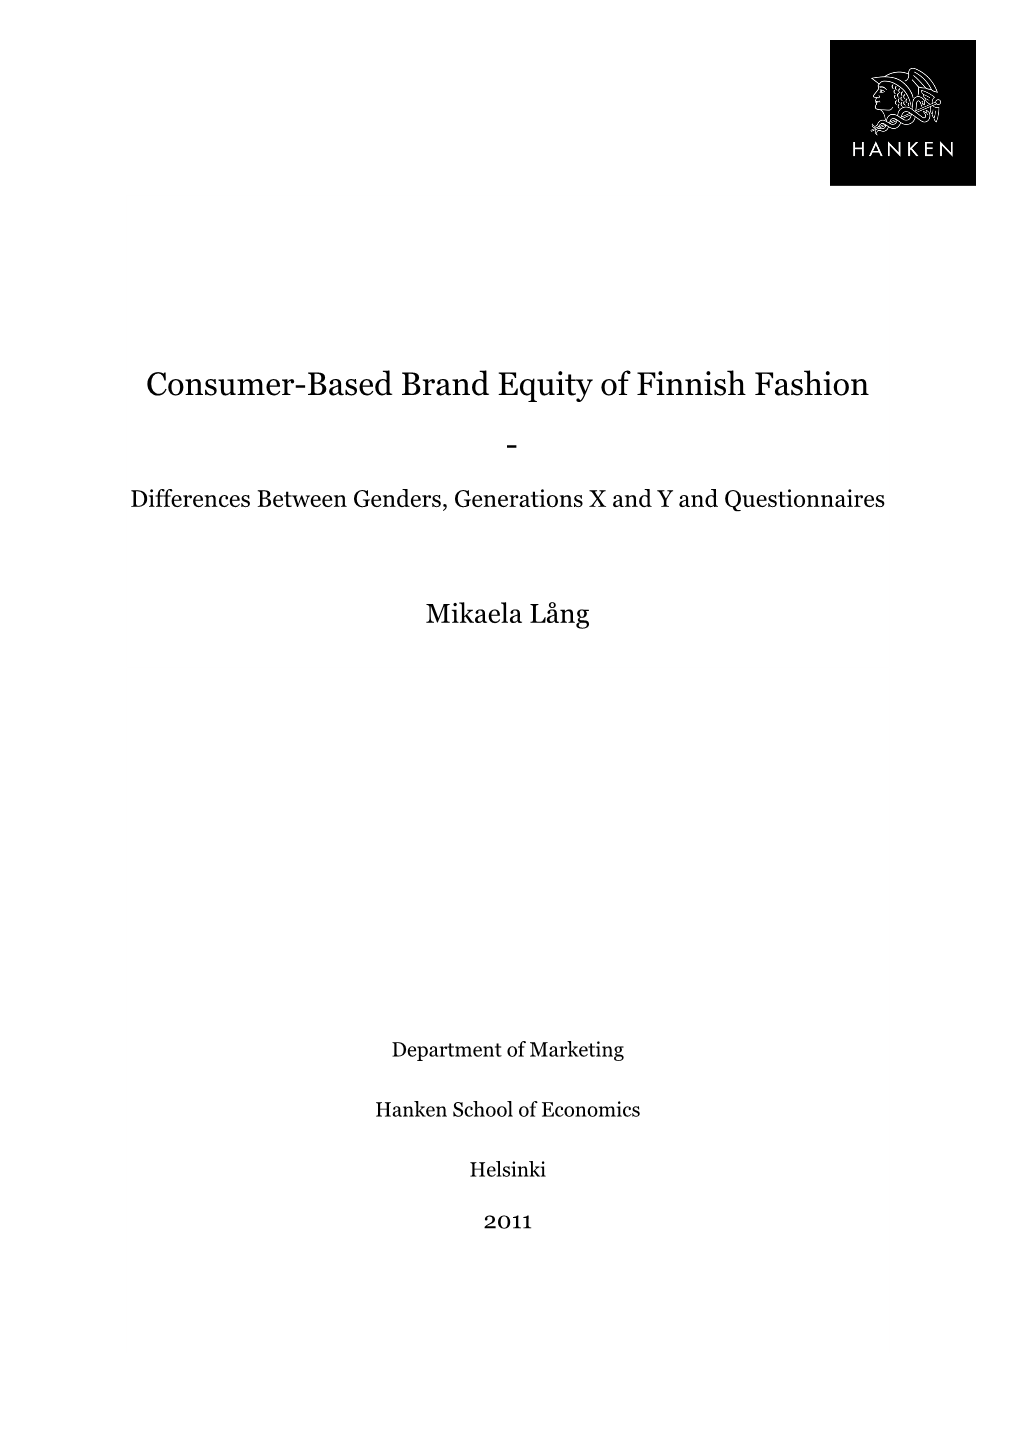 Consumer-Based Brand Equity of Finnish Fashion